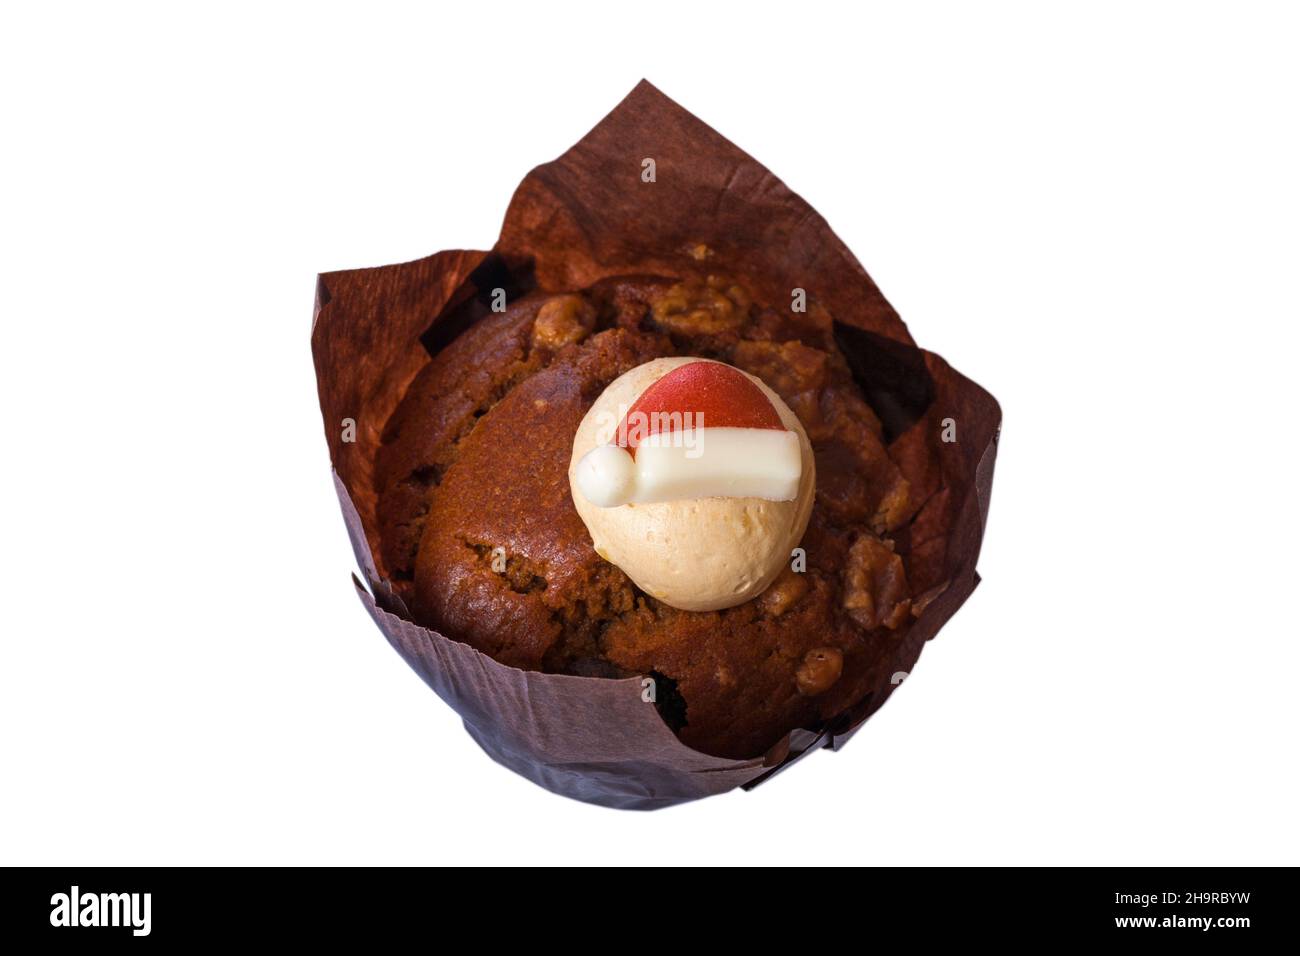 https://c8.alamy.com/comp/2H9RBYW/sticky-toffee-muffin-fresh-from-ms-in-store-bakery-isolated-on-white-background-2H9RBYW.jpg